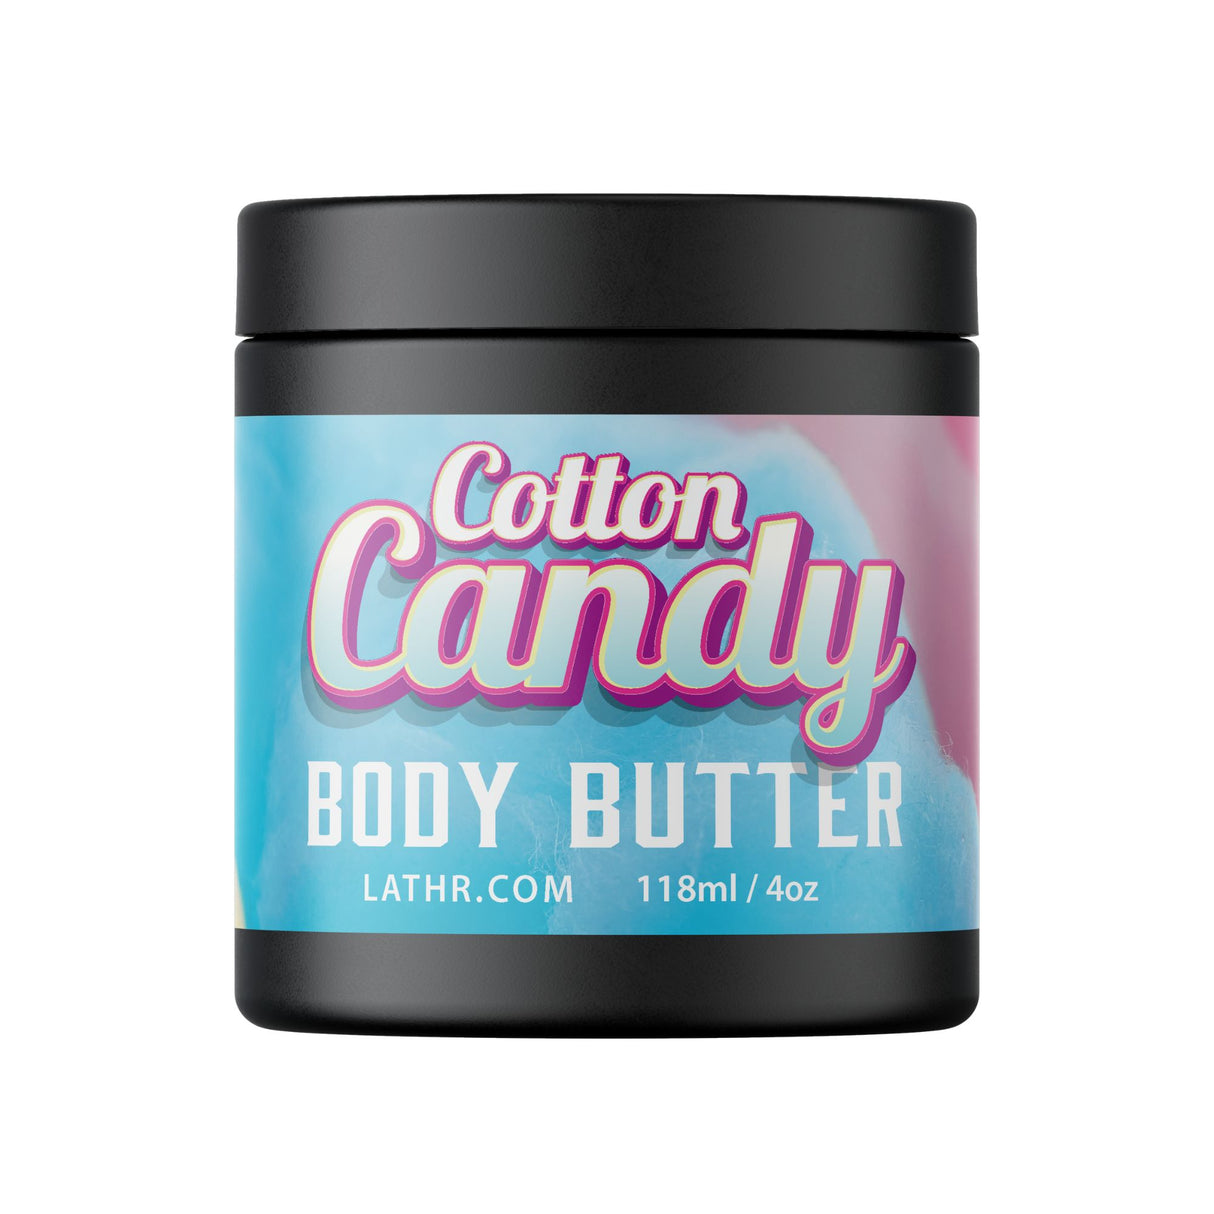 Body Butter - Cotton Candy